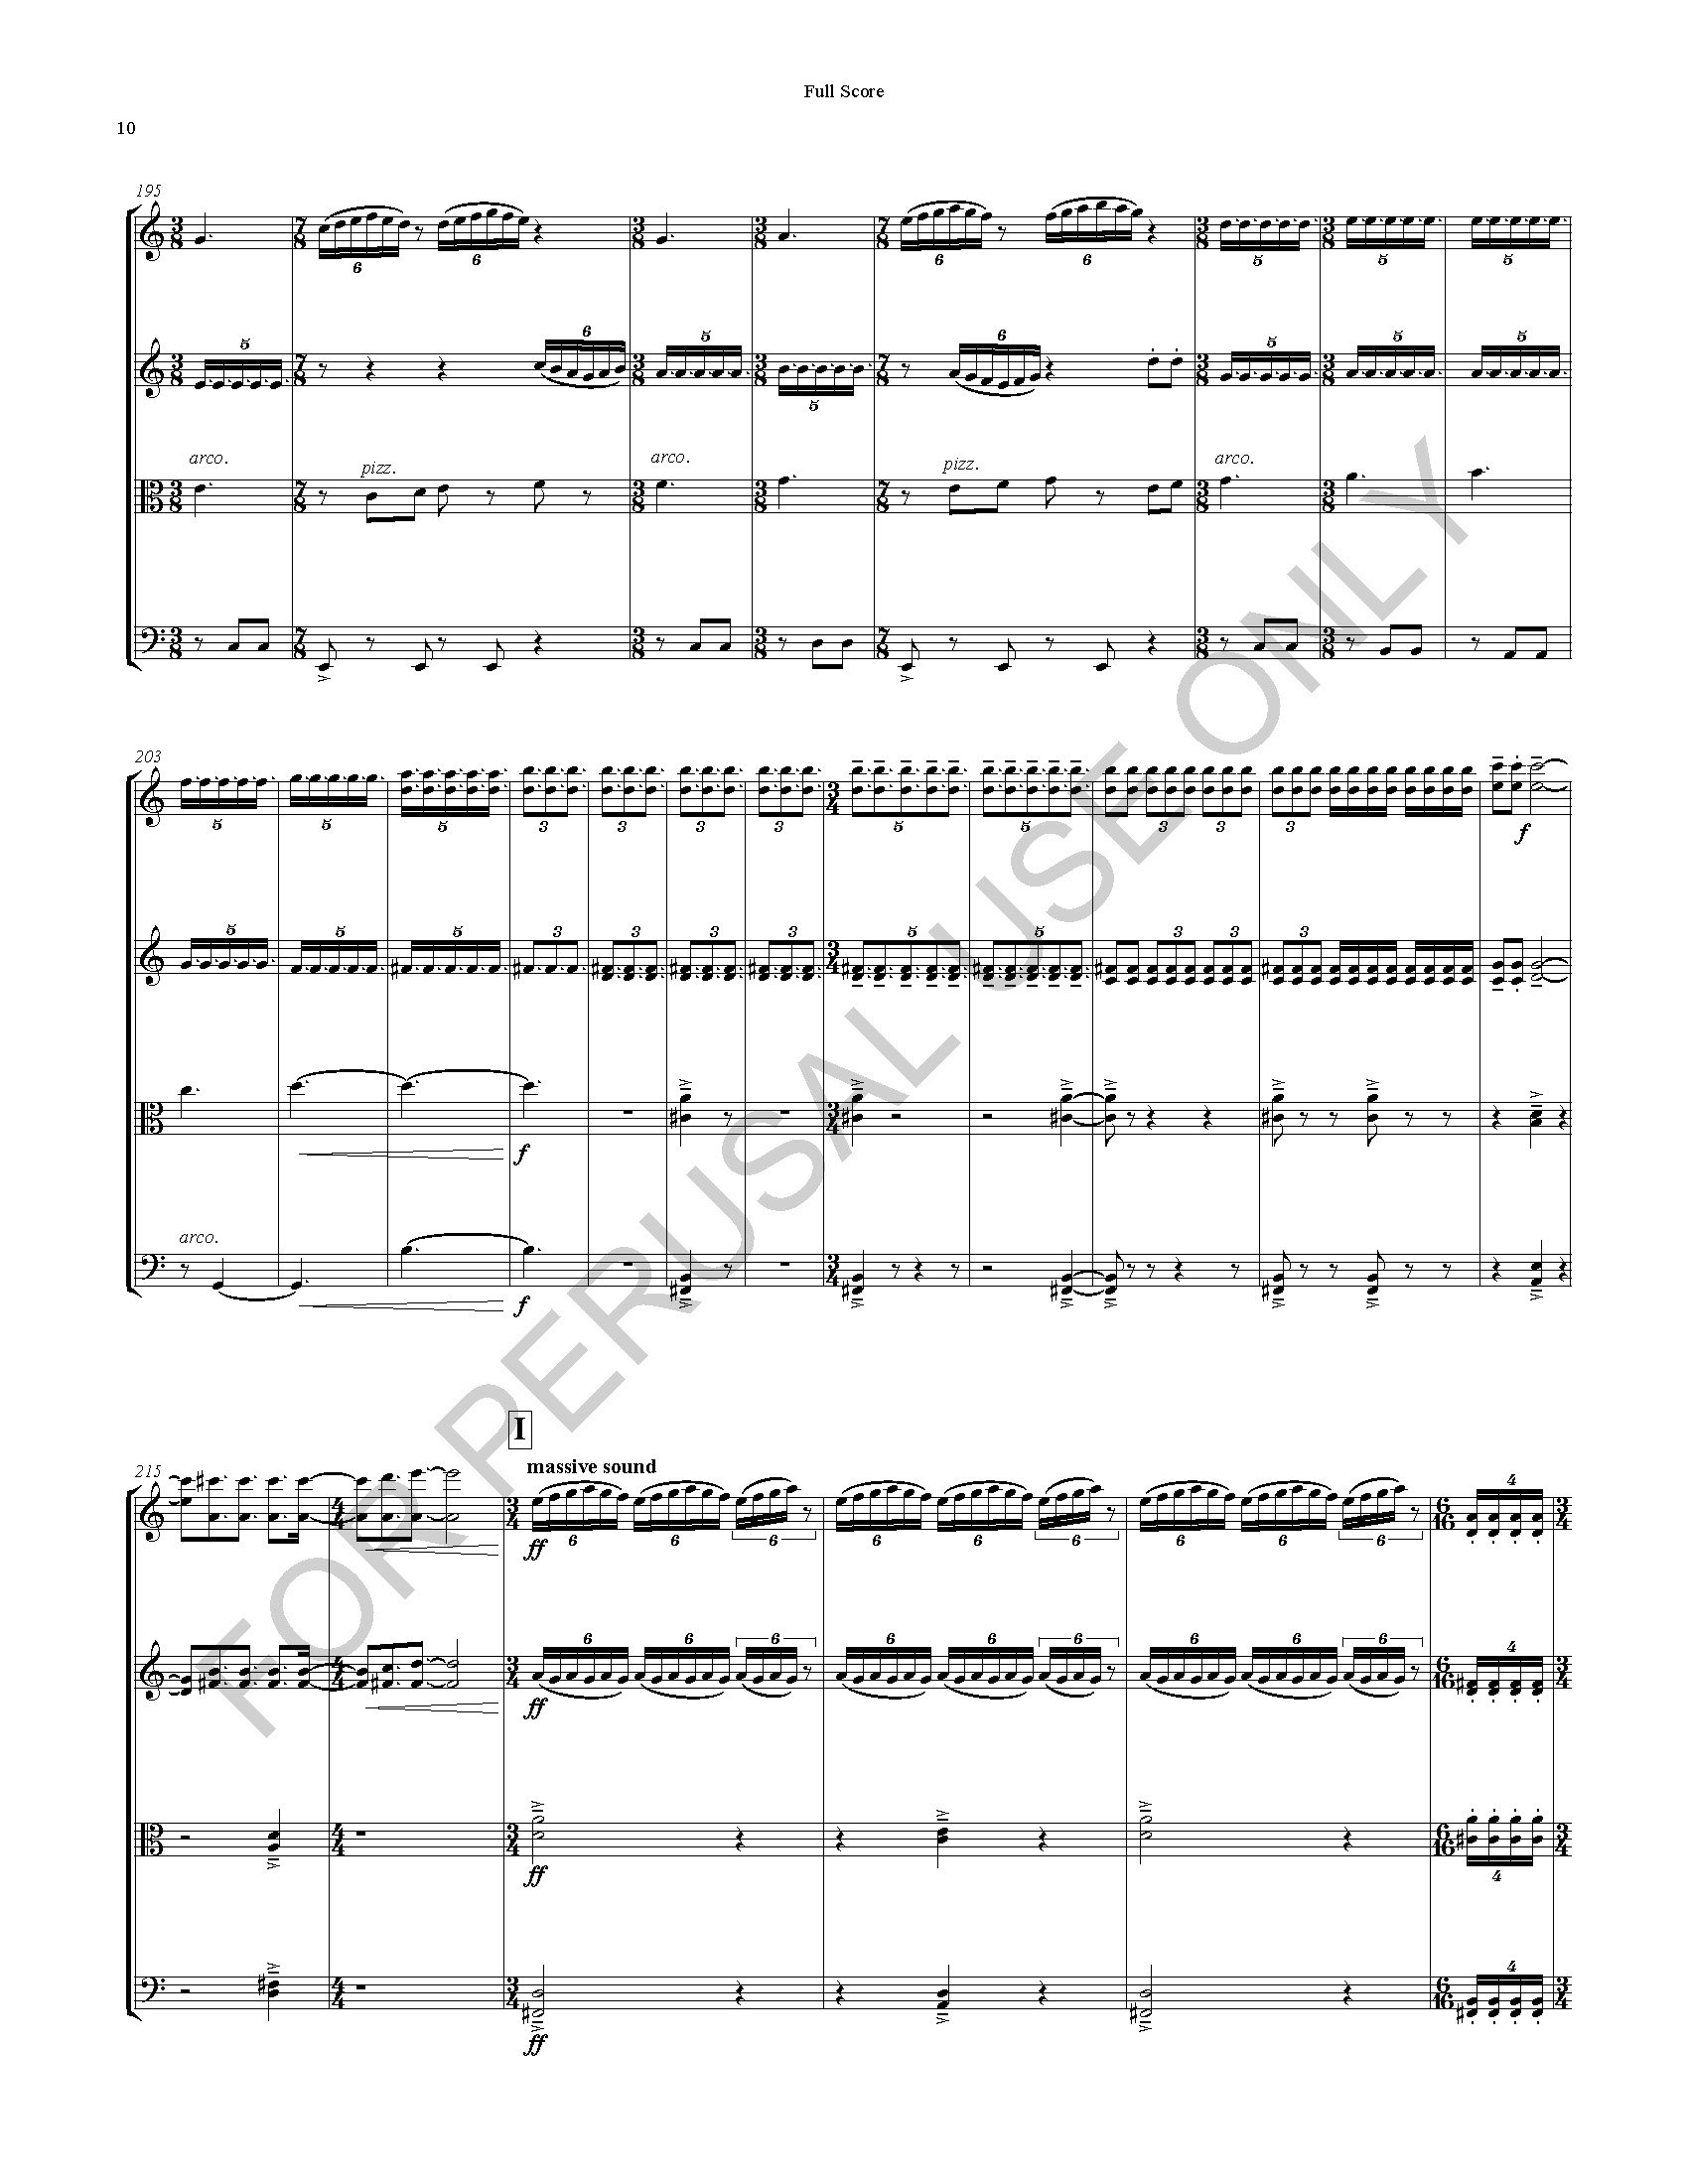 REFERENCE Smear Music (Full Score)_Page_10.jpg